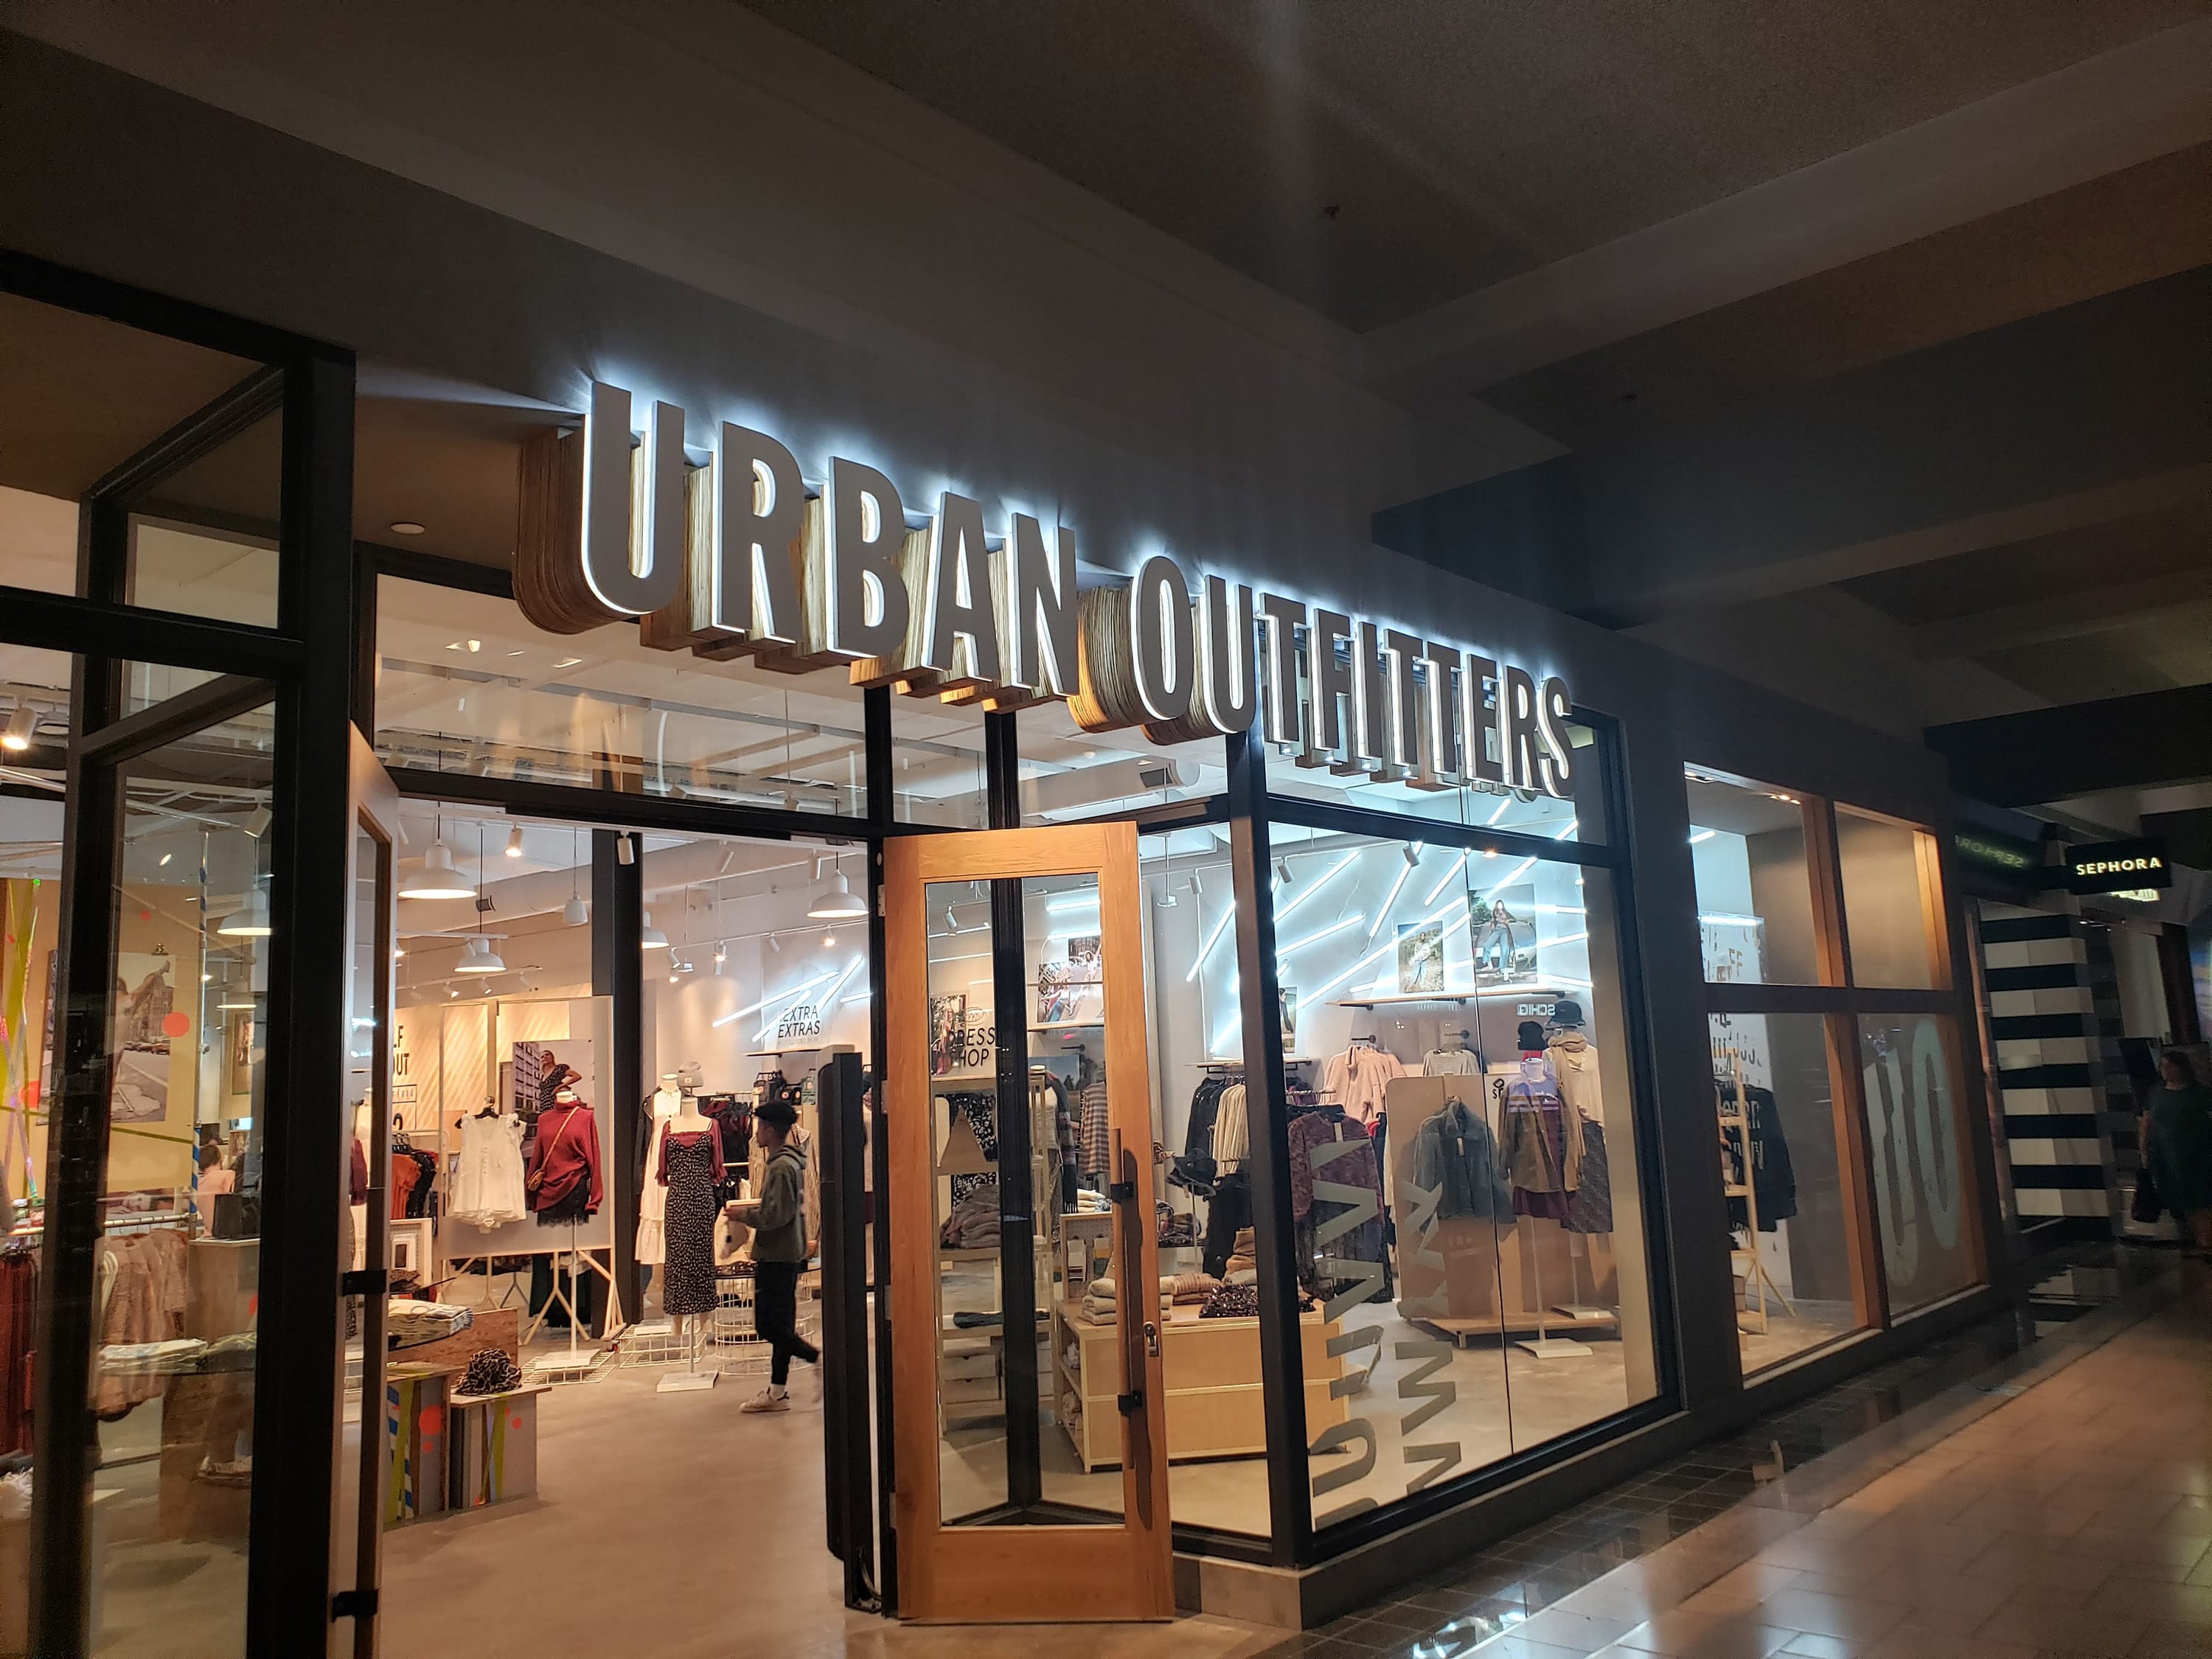 Urban Outfitters - Drulyk Construction